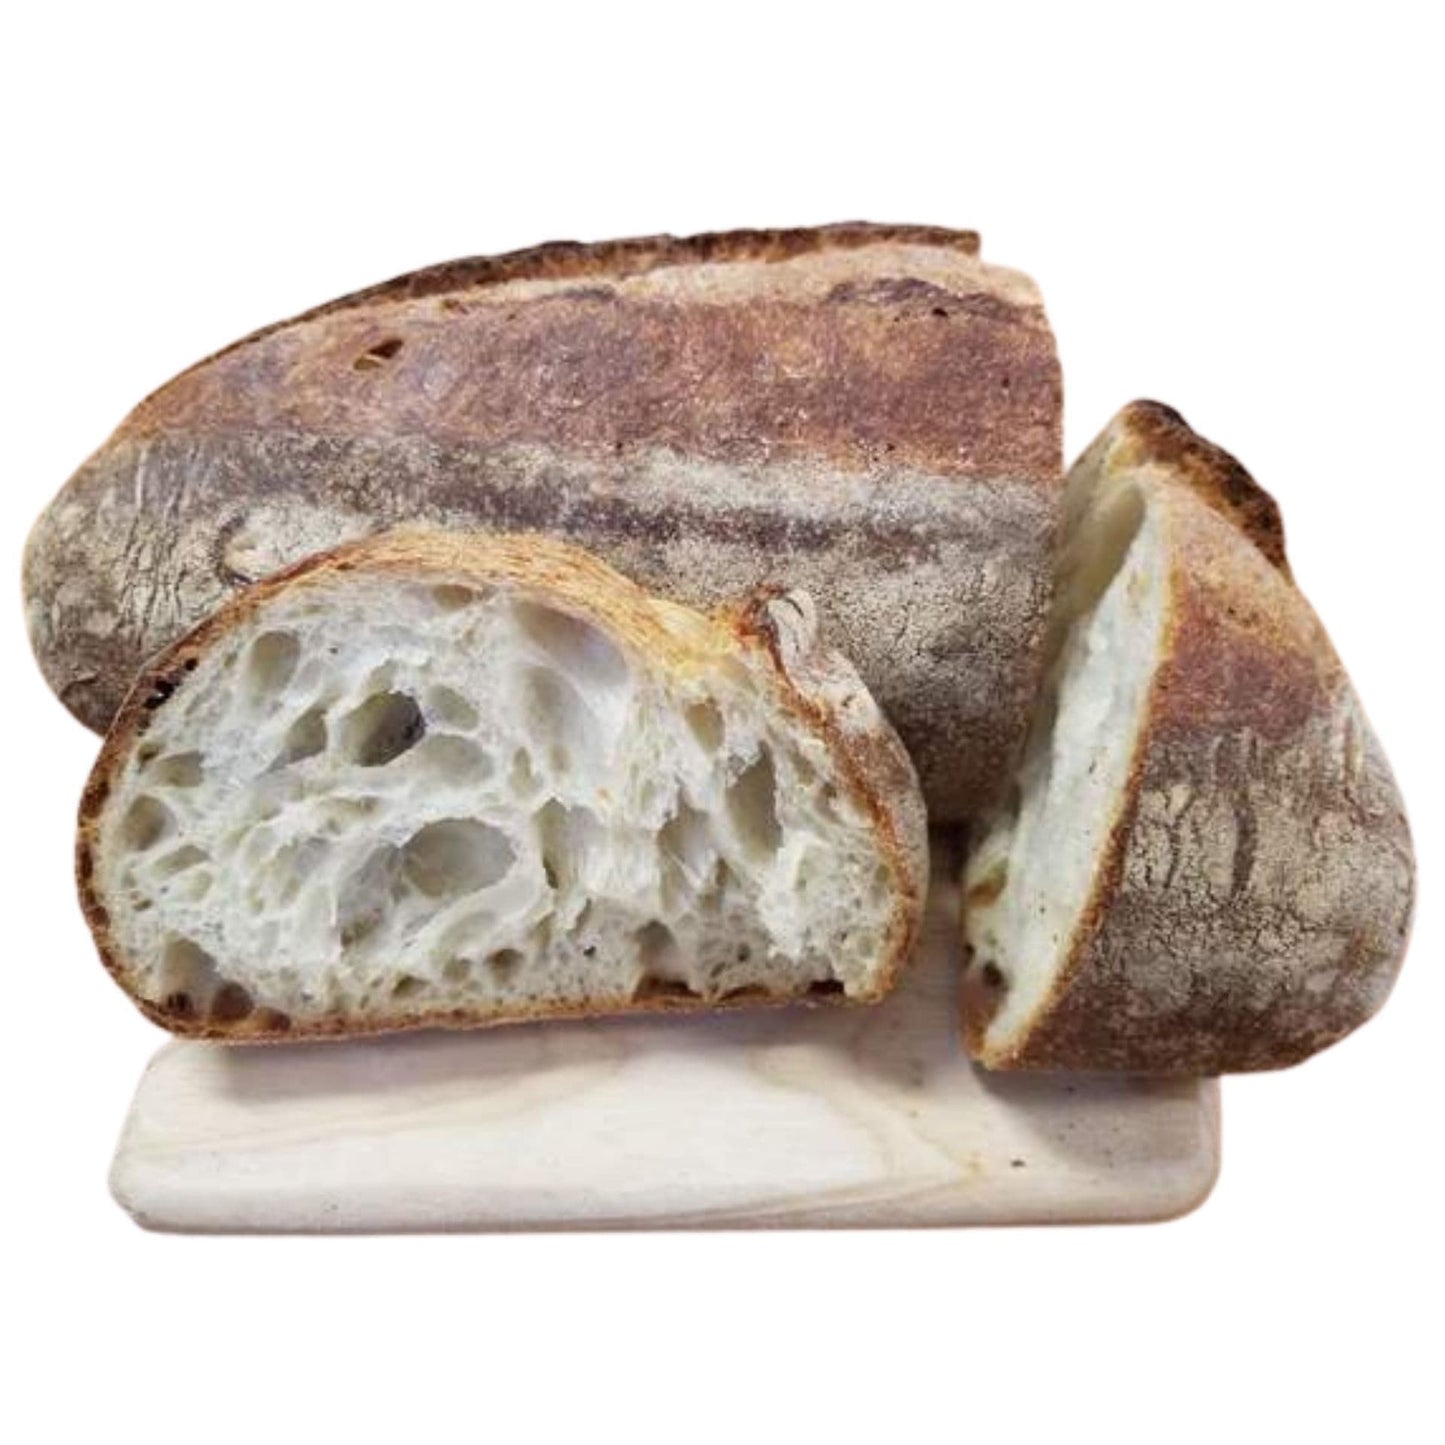 COUNTRY WHITE LOAF (800g)